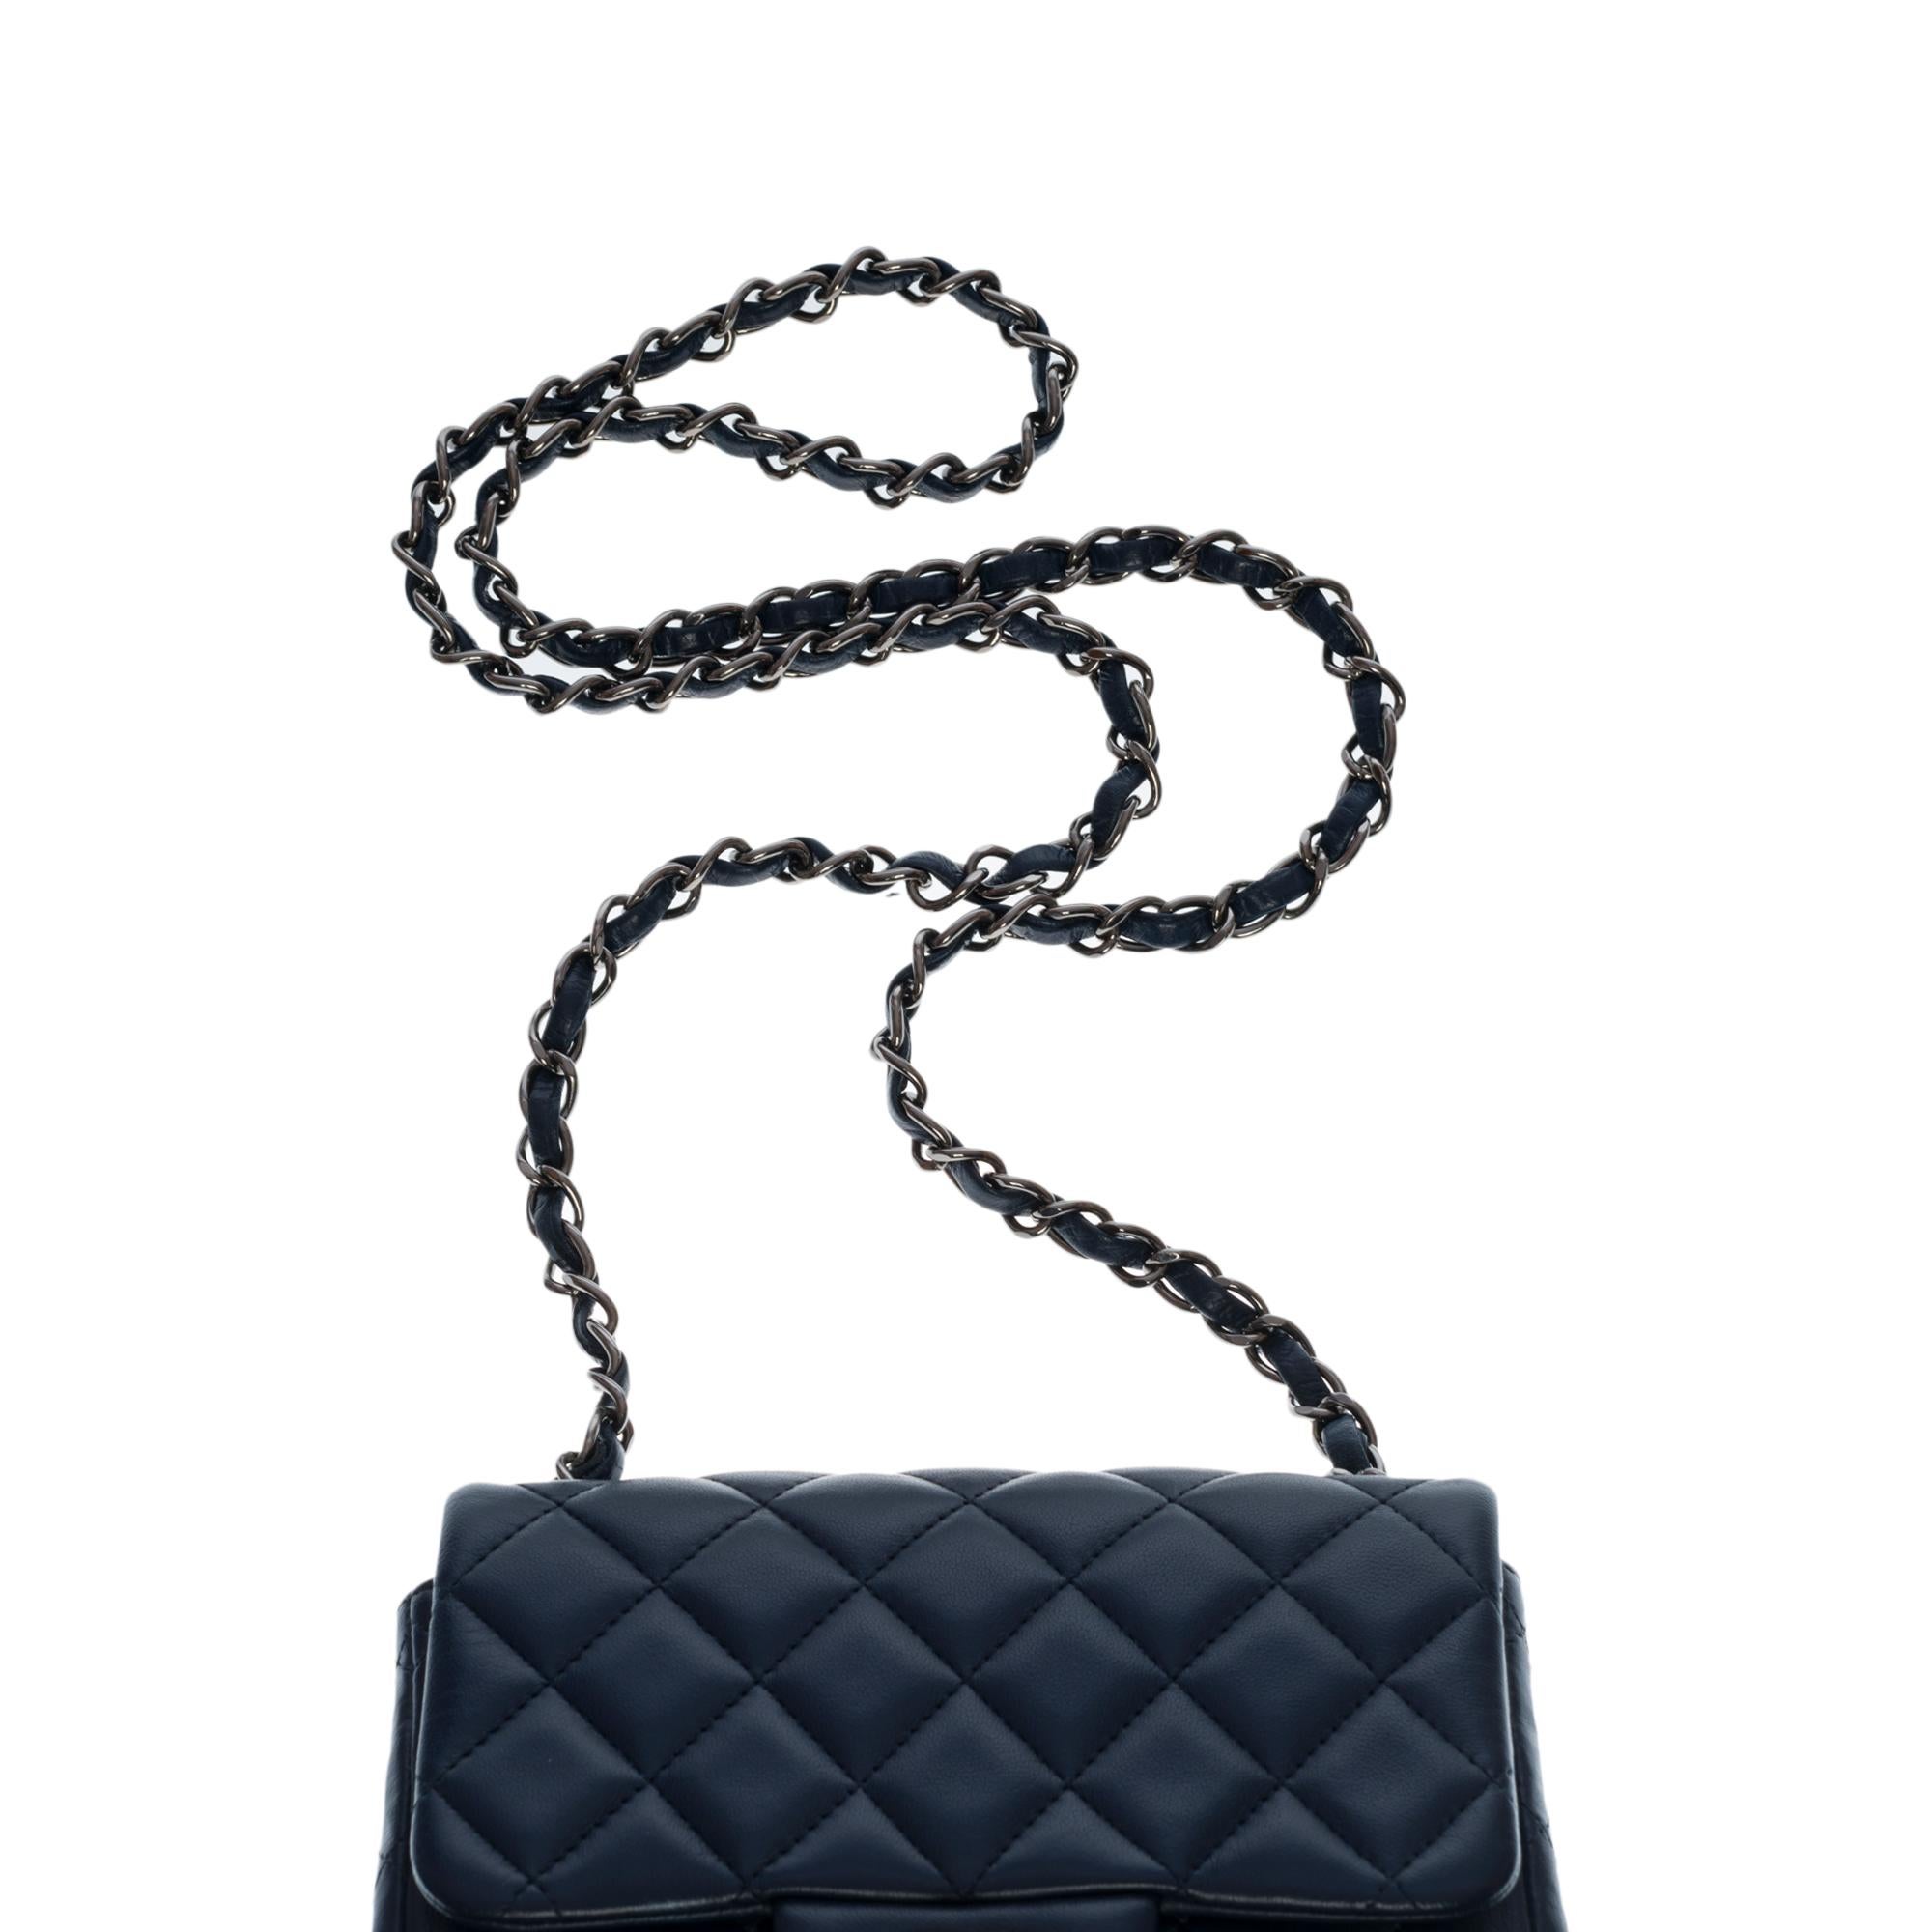 Chanel Mini Timeless Shoulder Flap bag in Dark Blue quilted leather, SHW 3